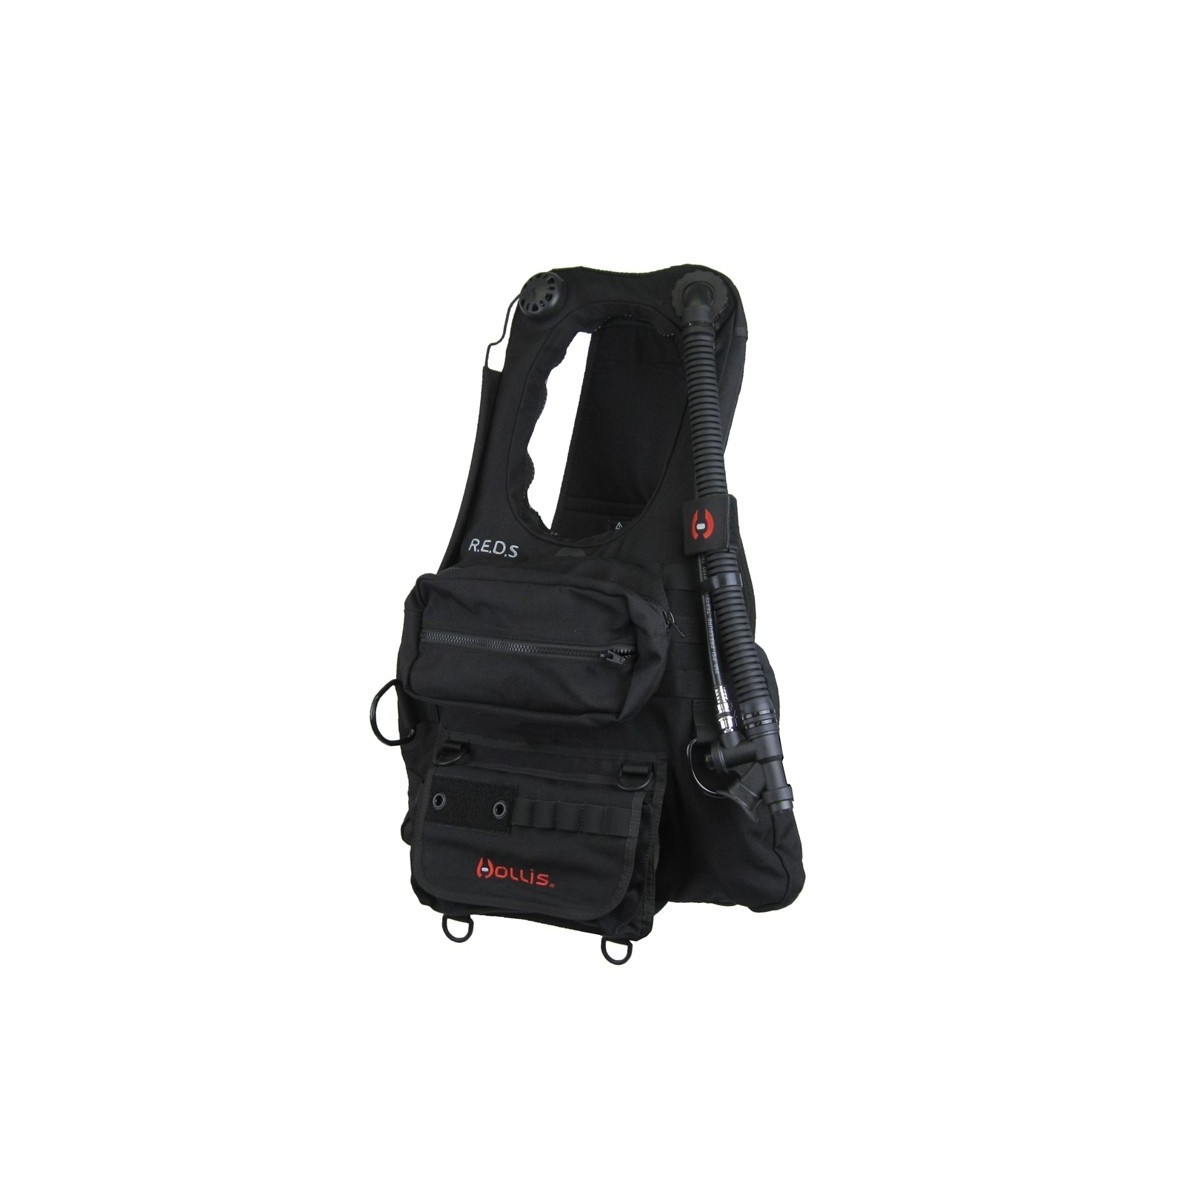 Hollis Rapid Emergency Deployment System (REDS) BCD COMPLETE SYSTEM